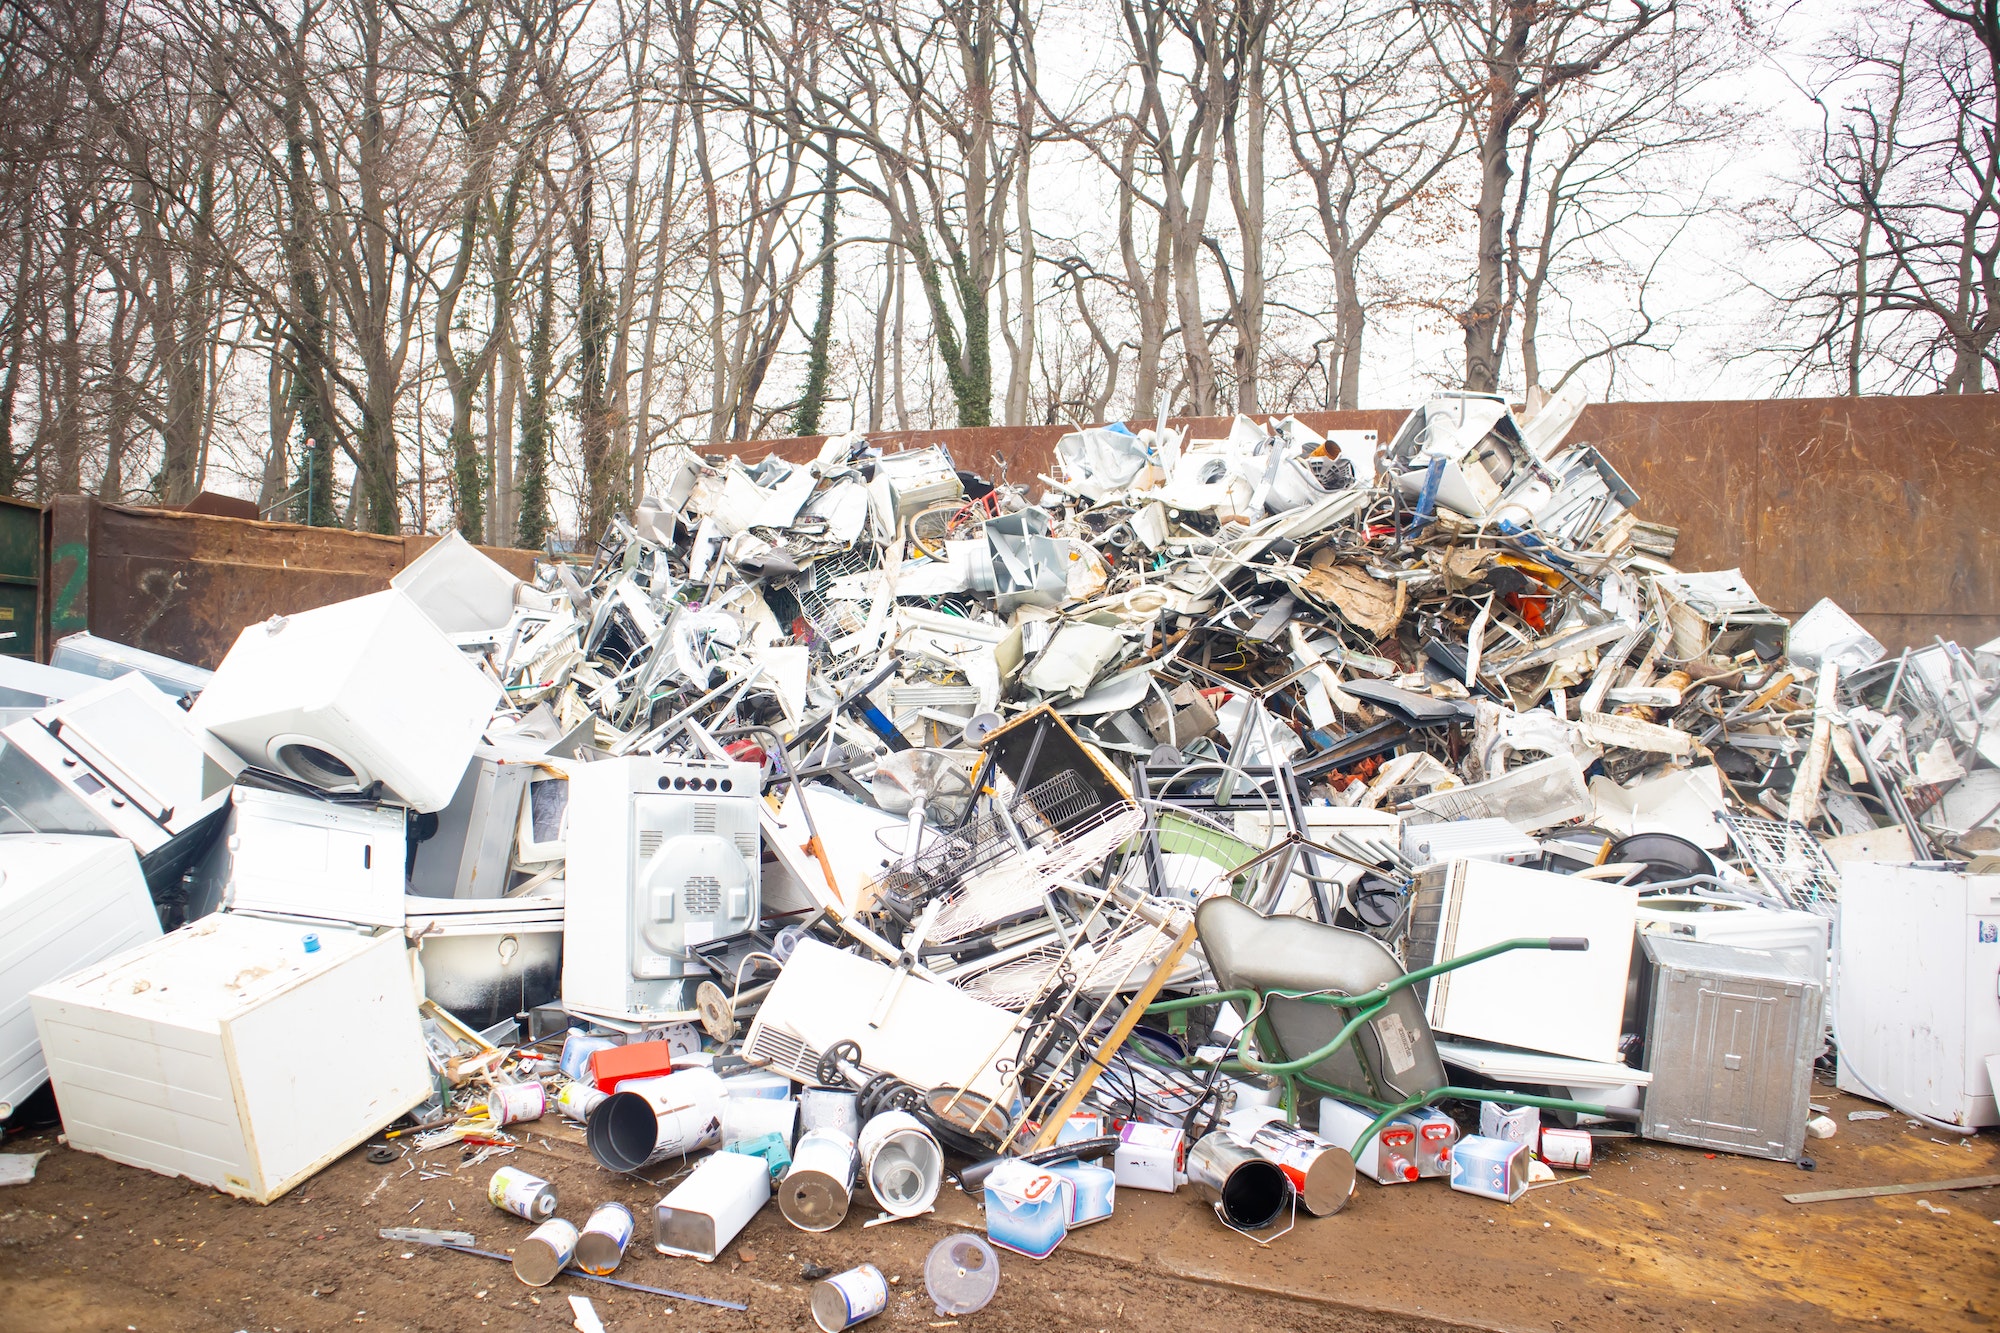 garbage dump, scrap metal and electrical appliances, disposal, recycling of old things